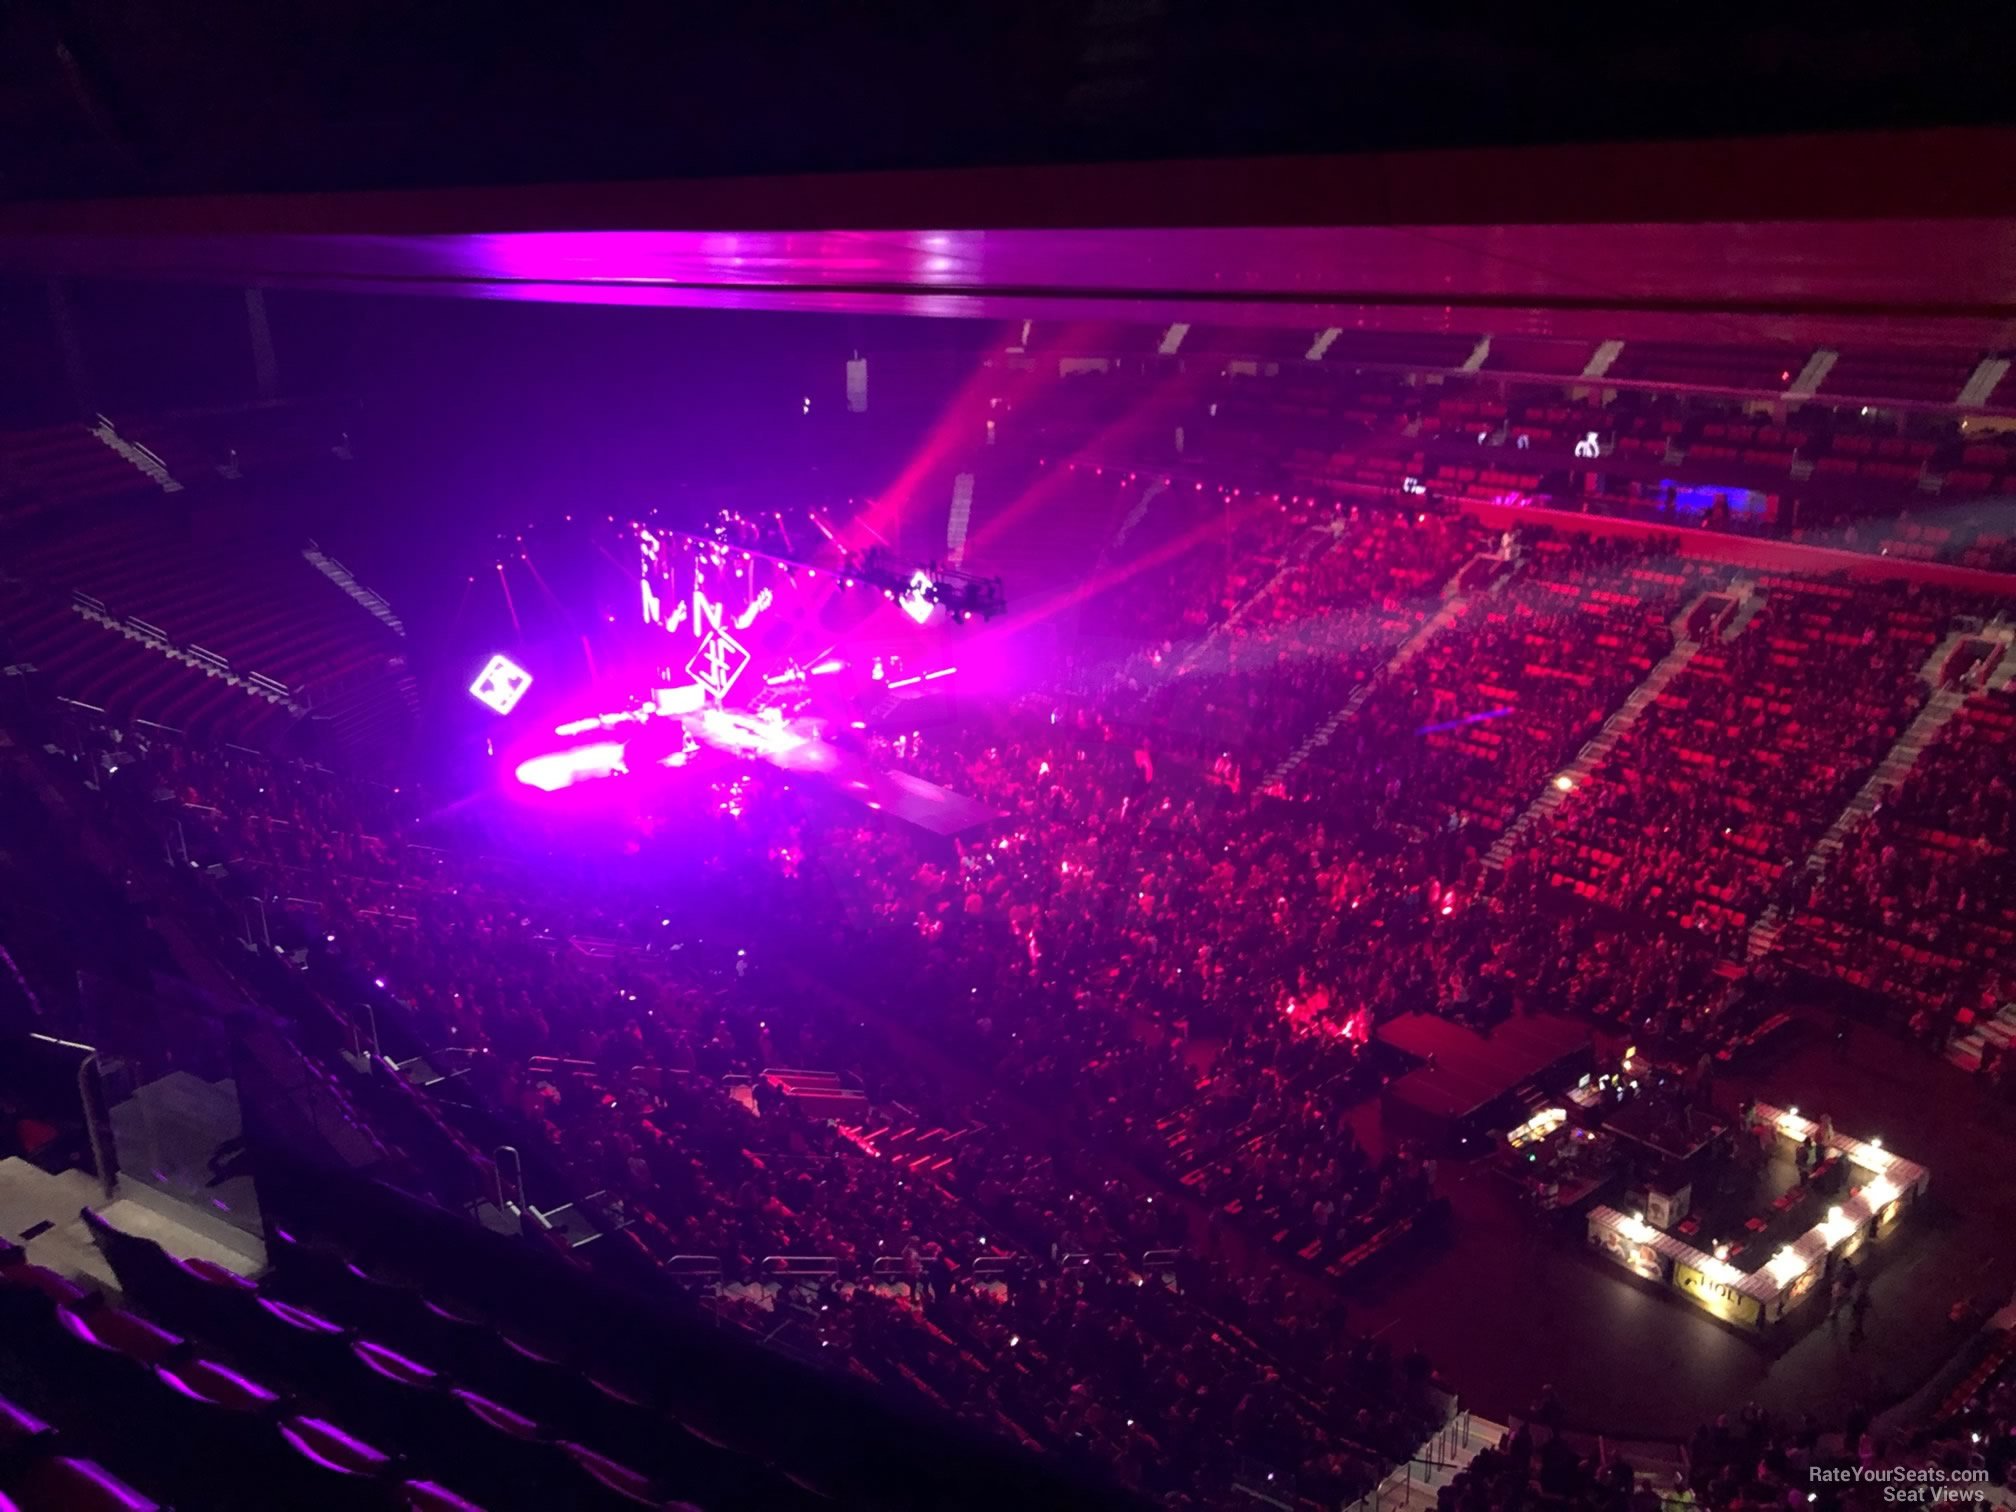 section 222, row 7 seat view  for concert - little caesars arena